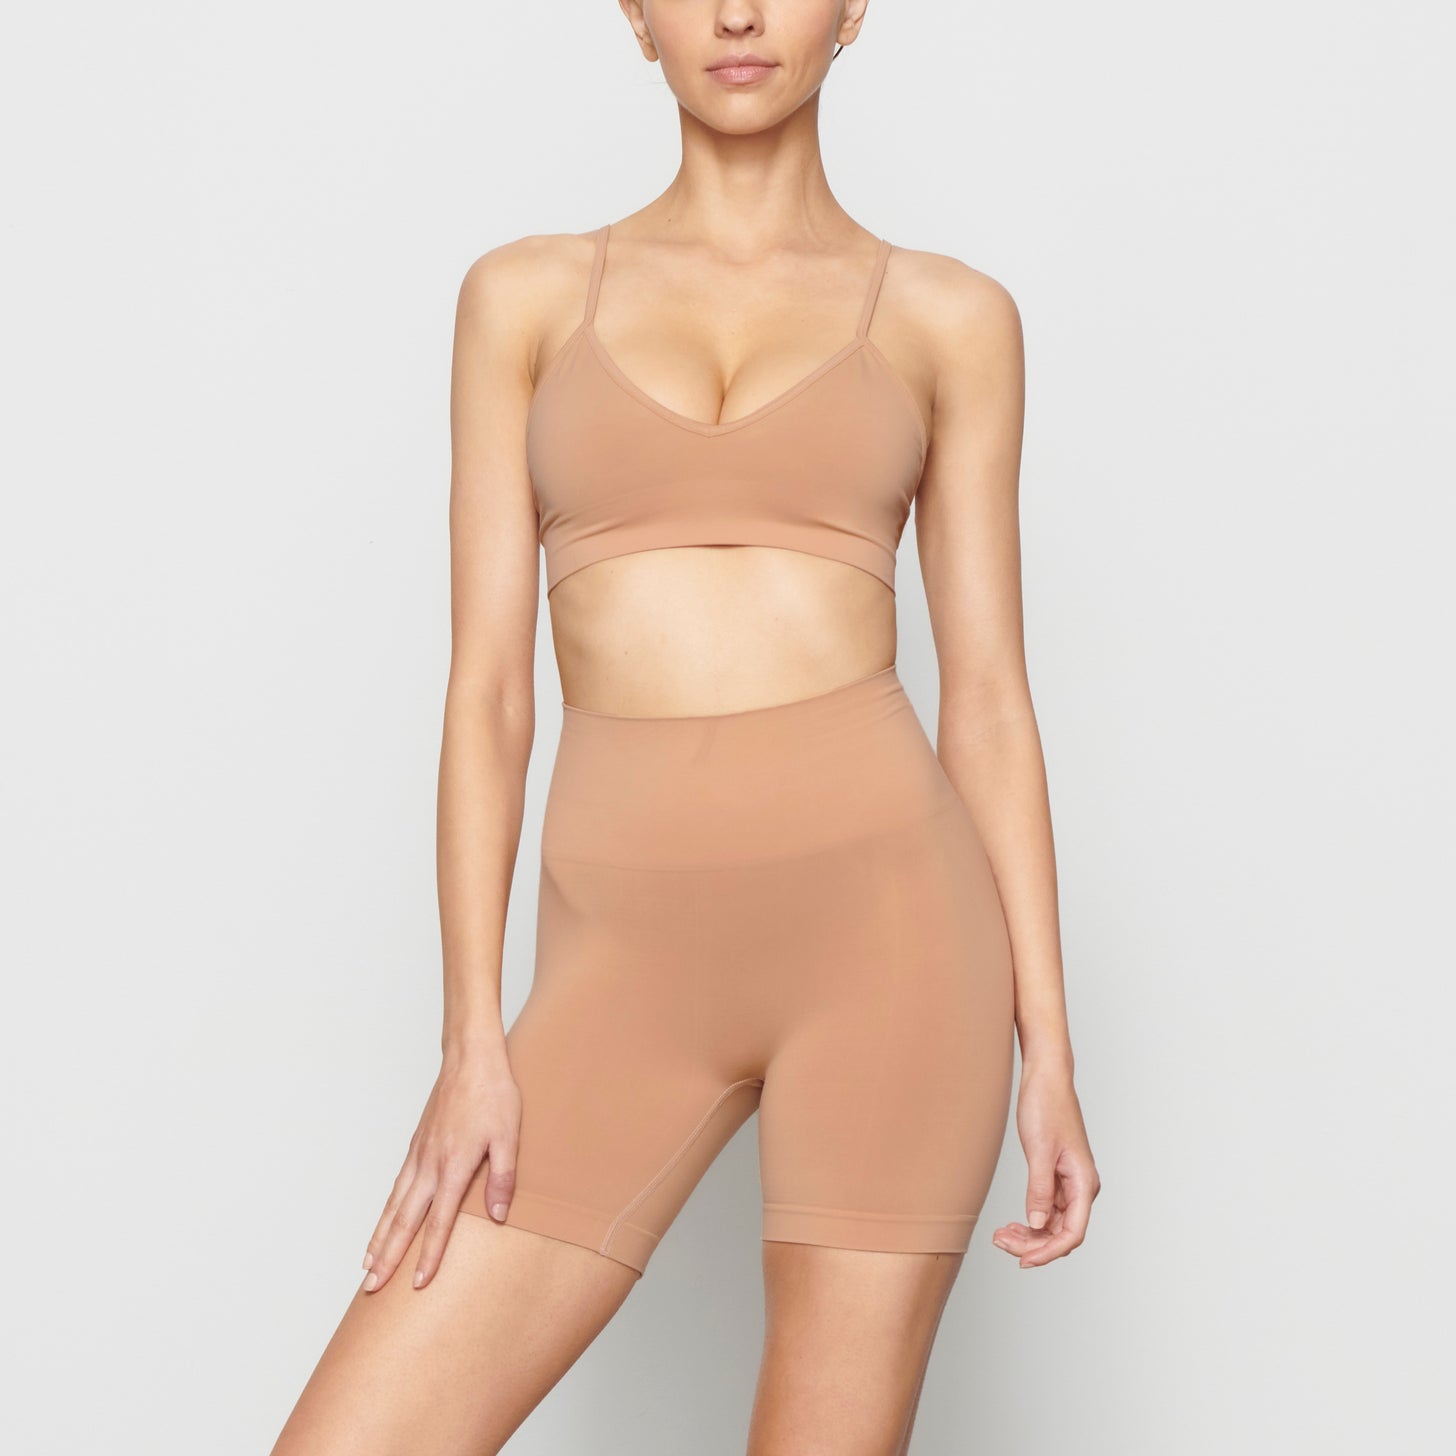 Shop new arrivals from Spanx and Skims including shapewear, bras